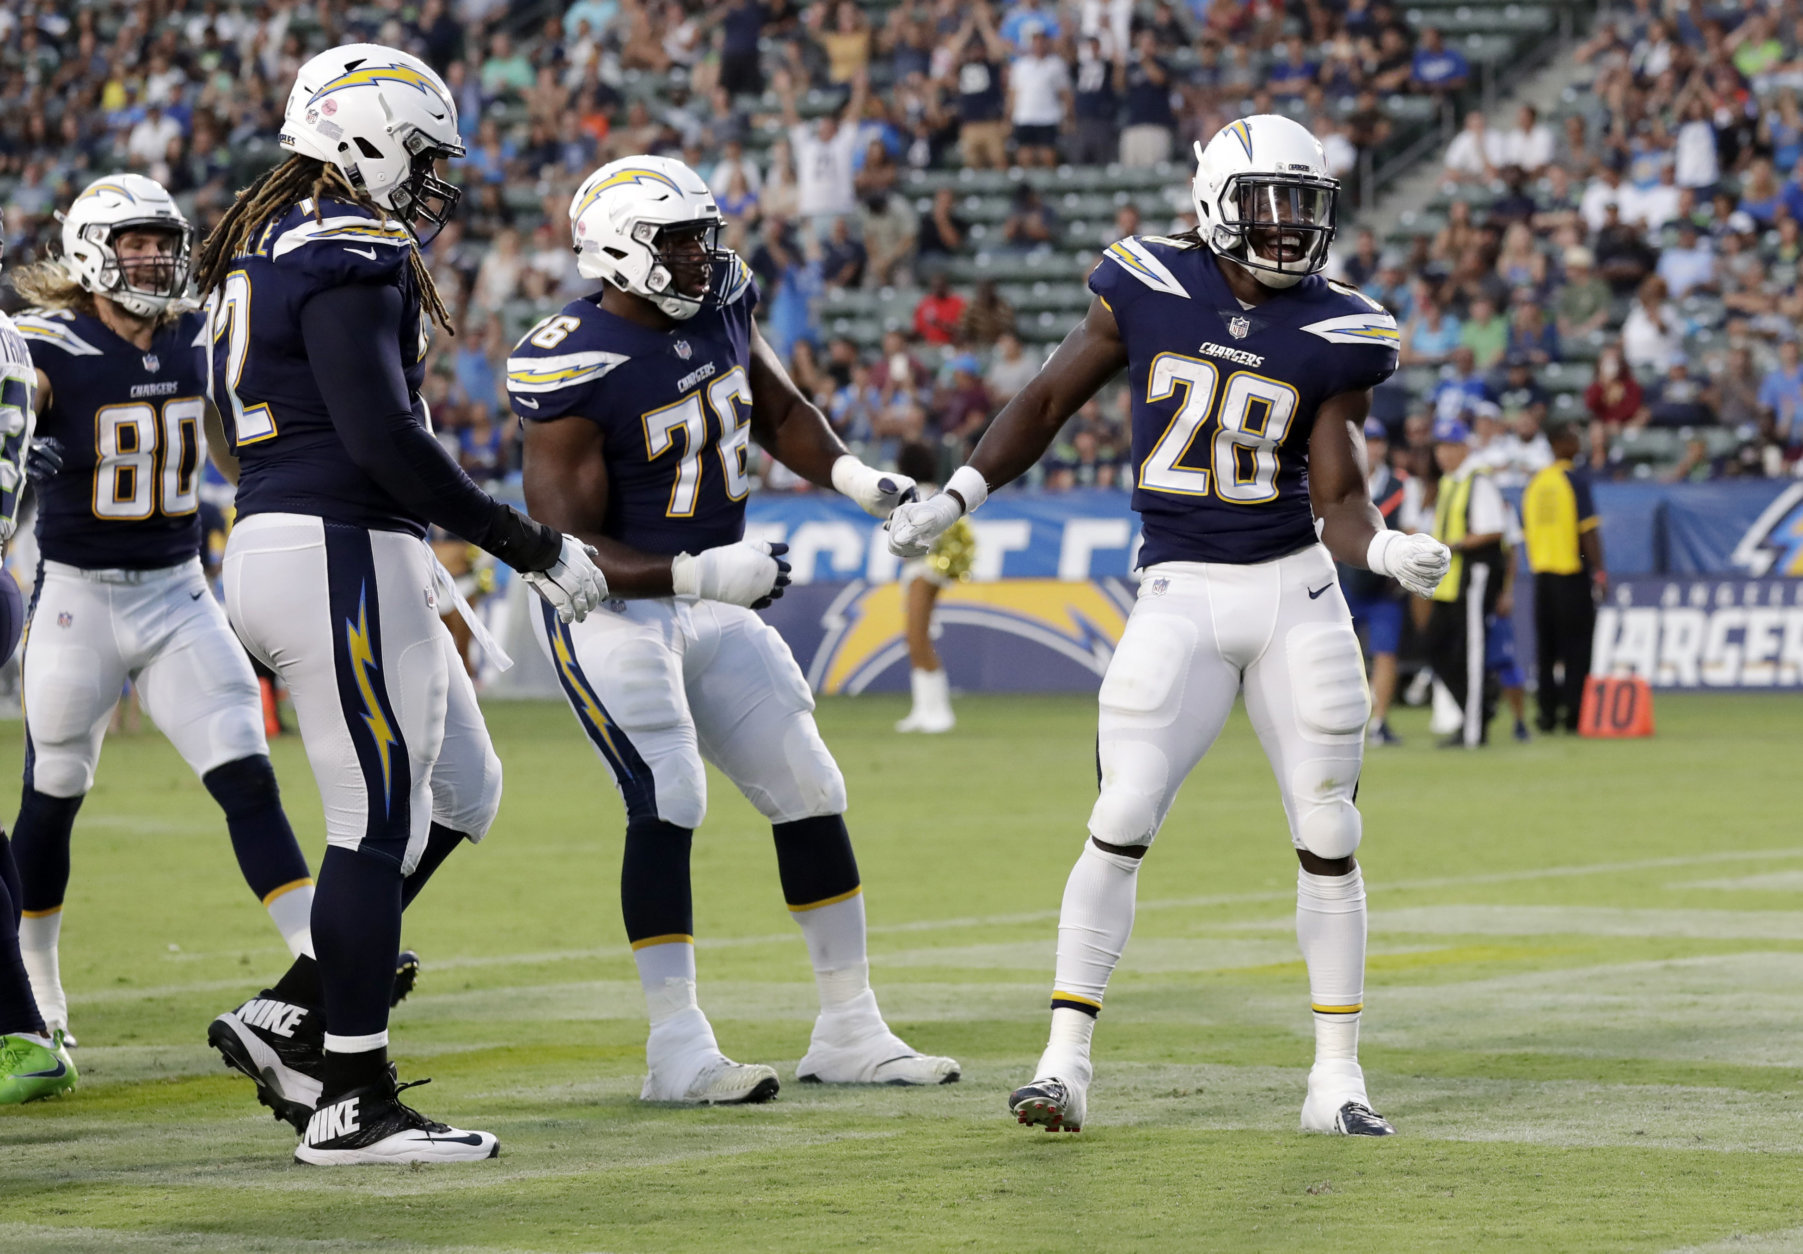 Los Angeles Chargers running back Melvin Gordon (28) celebrates after scoring a rushing touchdown against the Seattle Seahawks during the first half of an NFL preseason football game Saturday, Aug. 18, 2018, in Carson, Calif. (AP Photo/Gregory Bull)